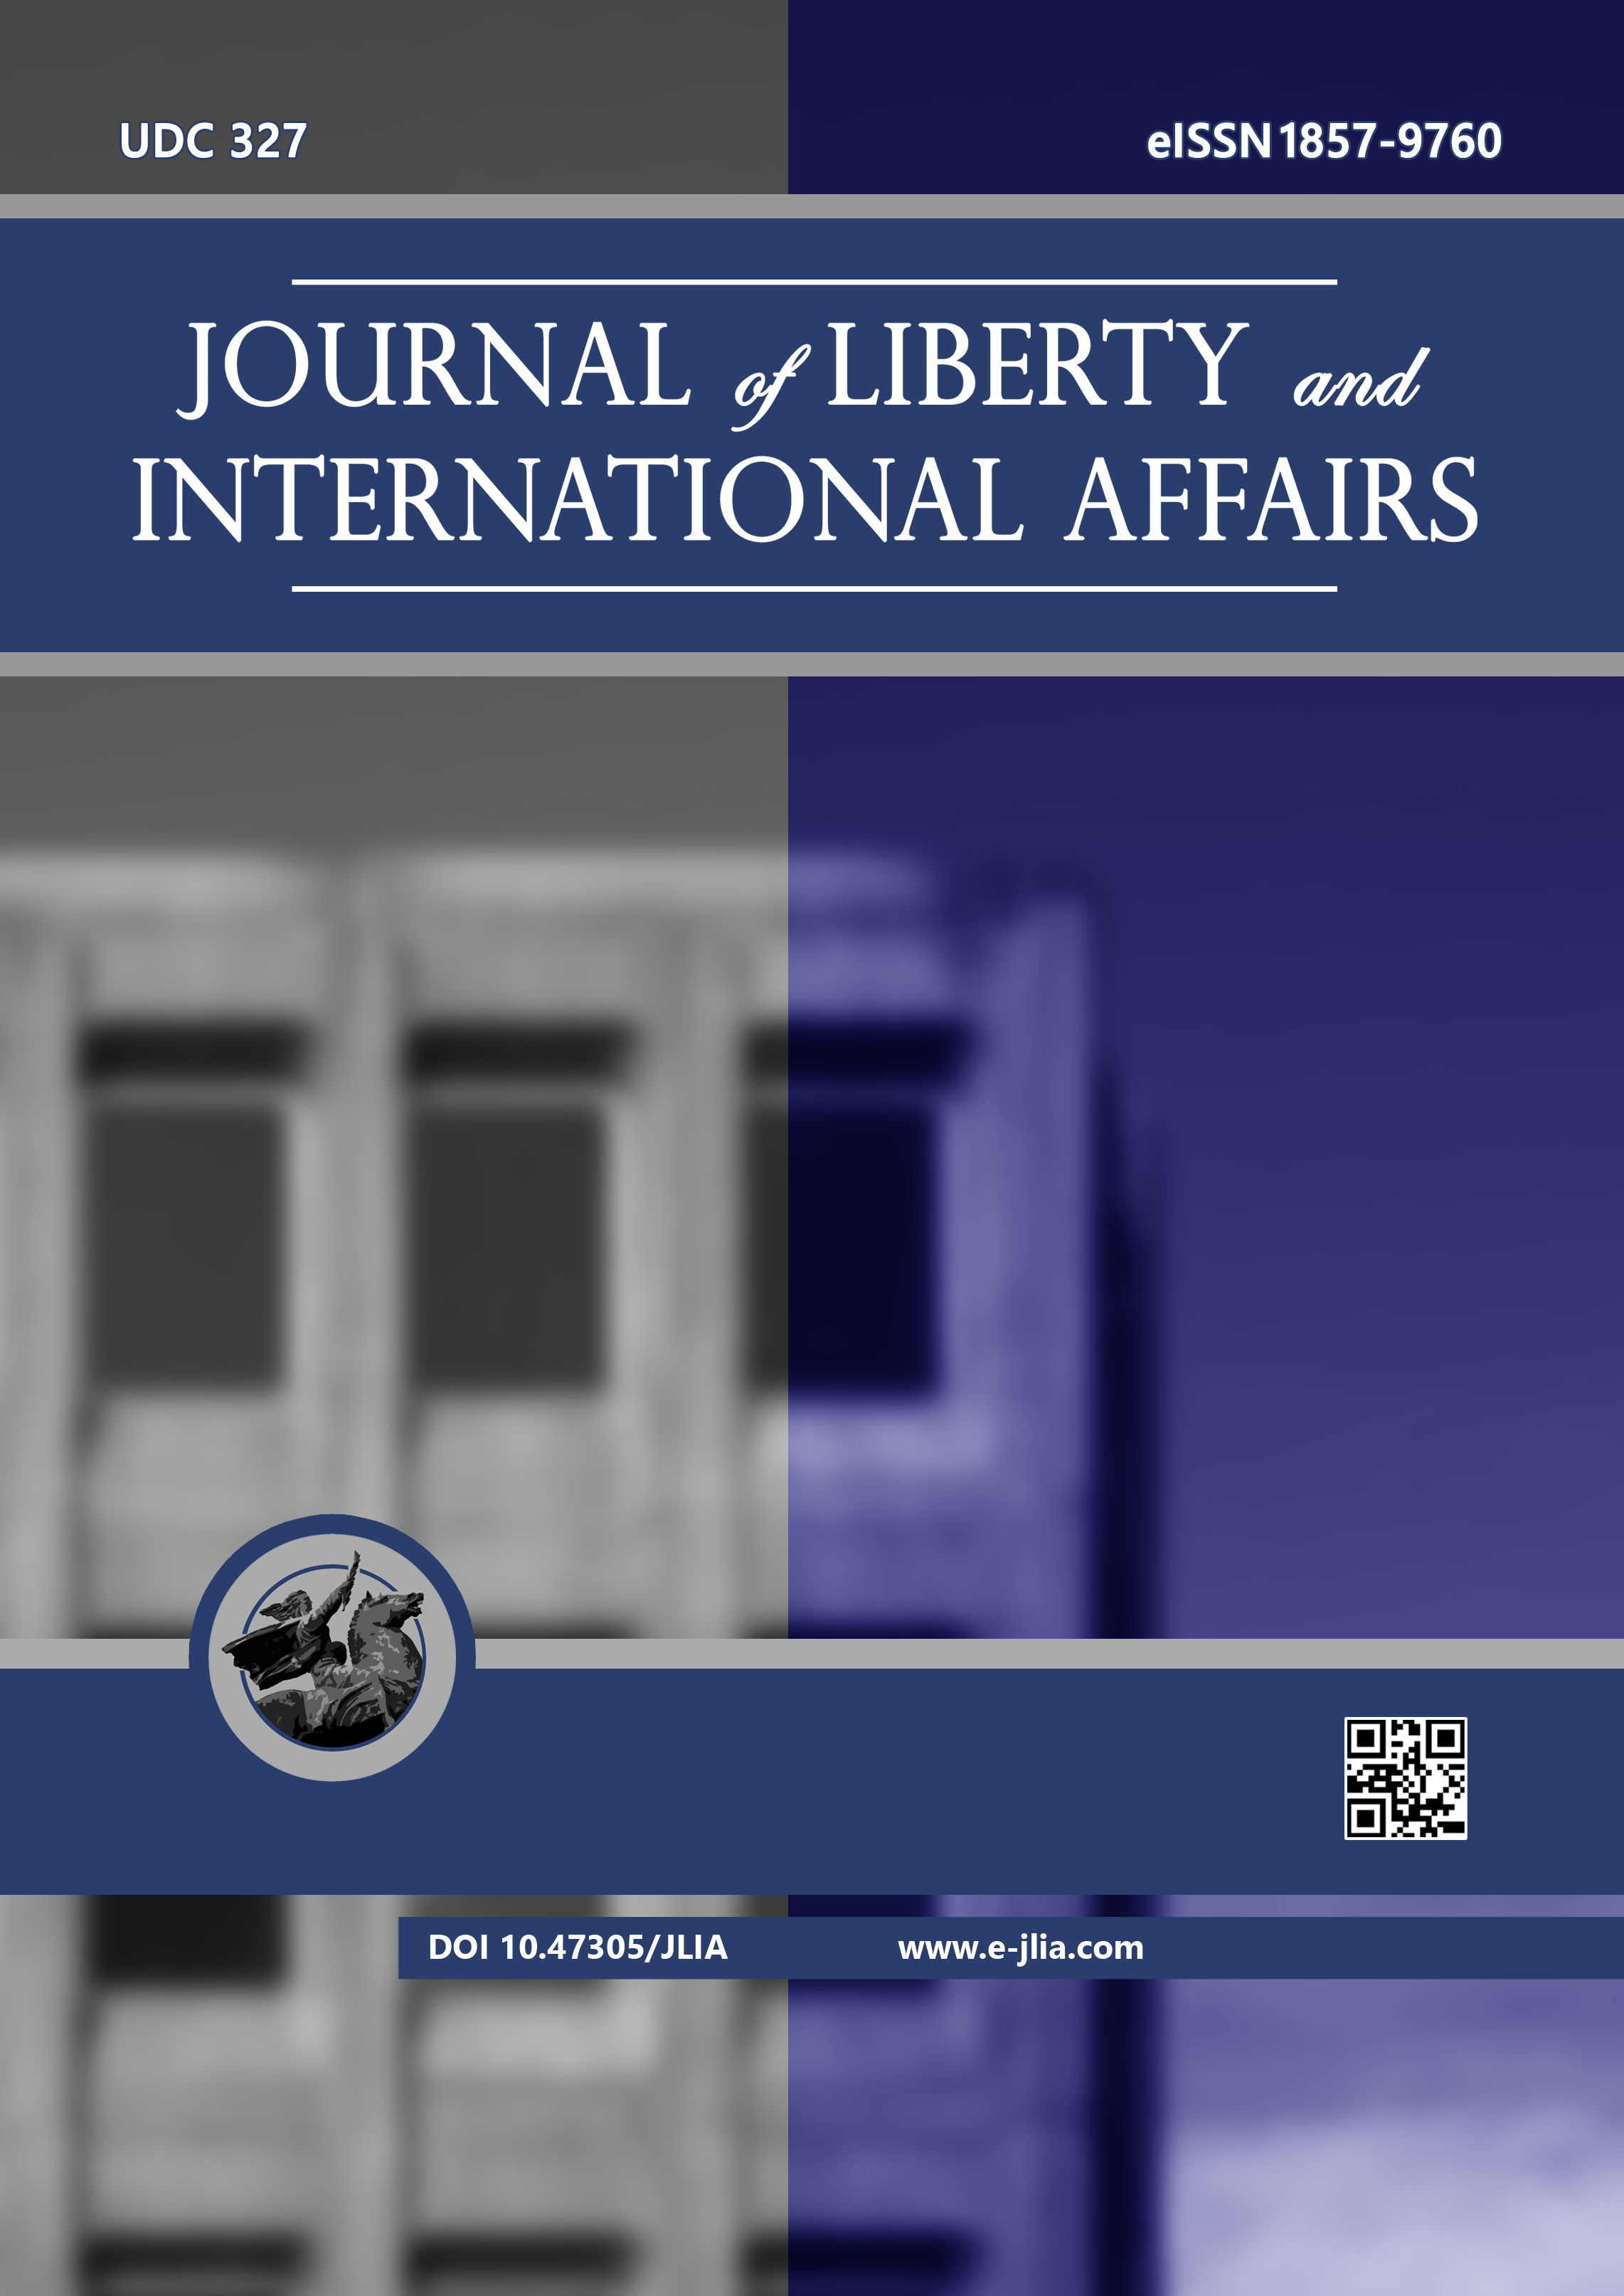 AFGHANISTAN UNDER TALIBAN: A NEW REGIME POSES A THREAT TO INTERNATIONAL STABILITY Cover Image